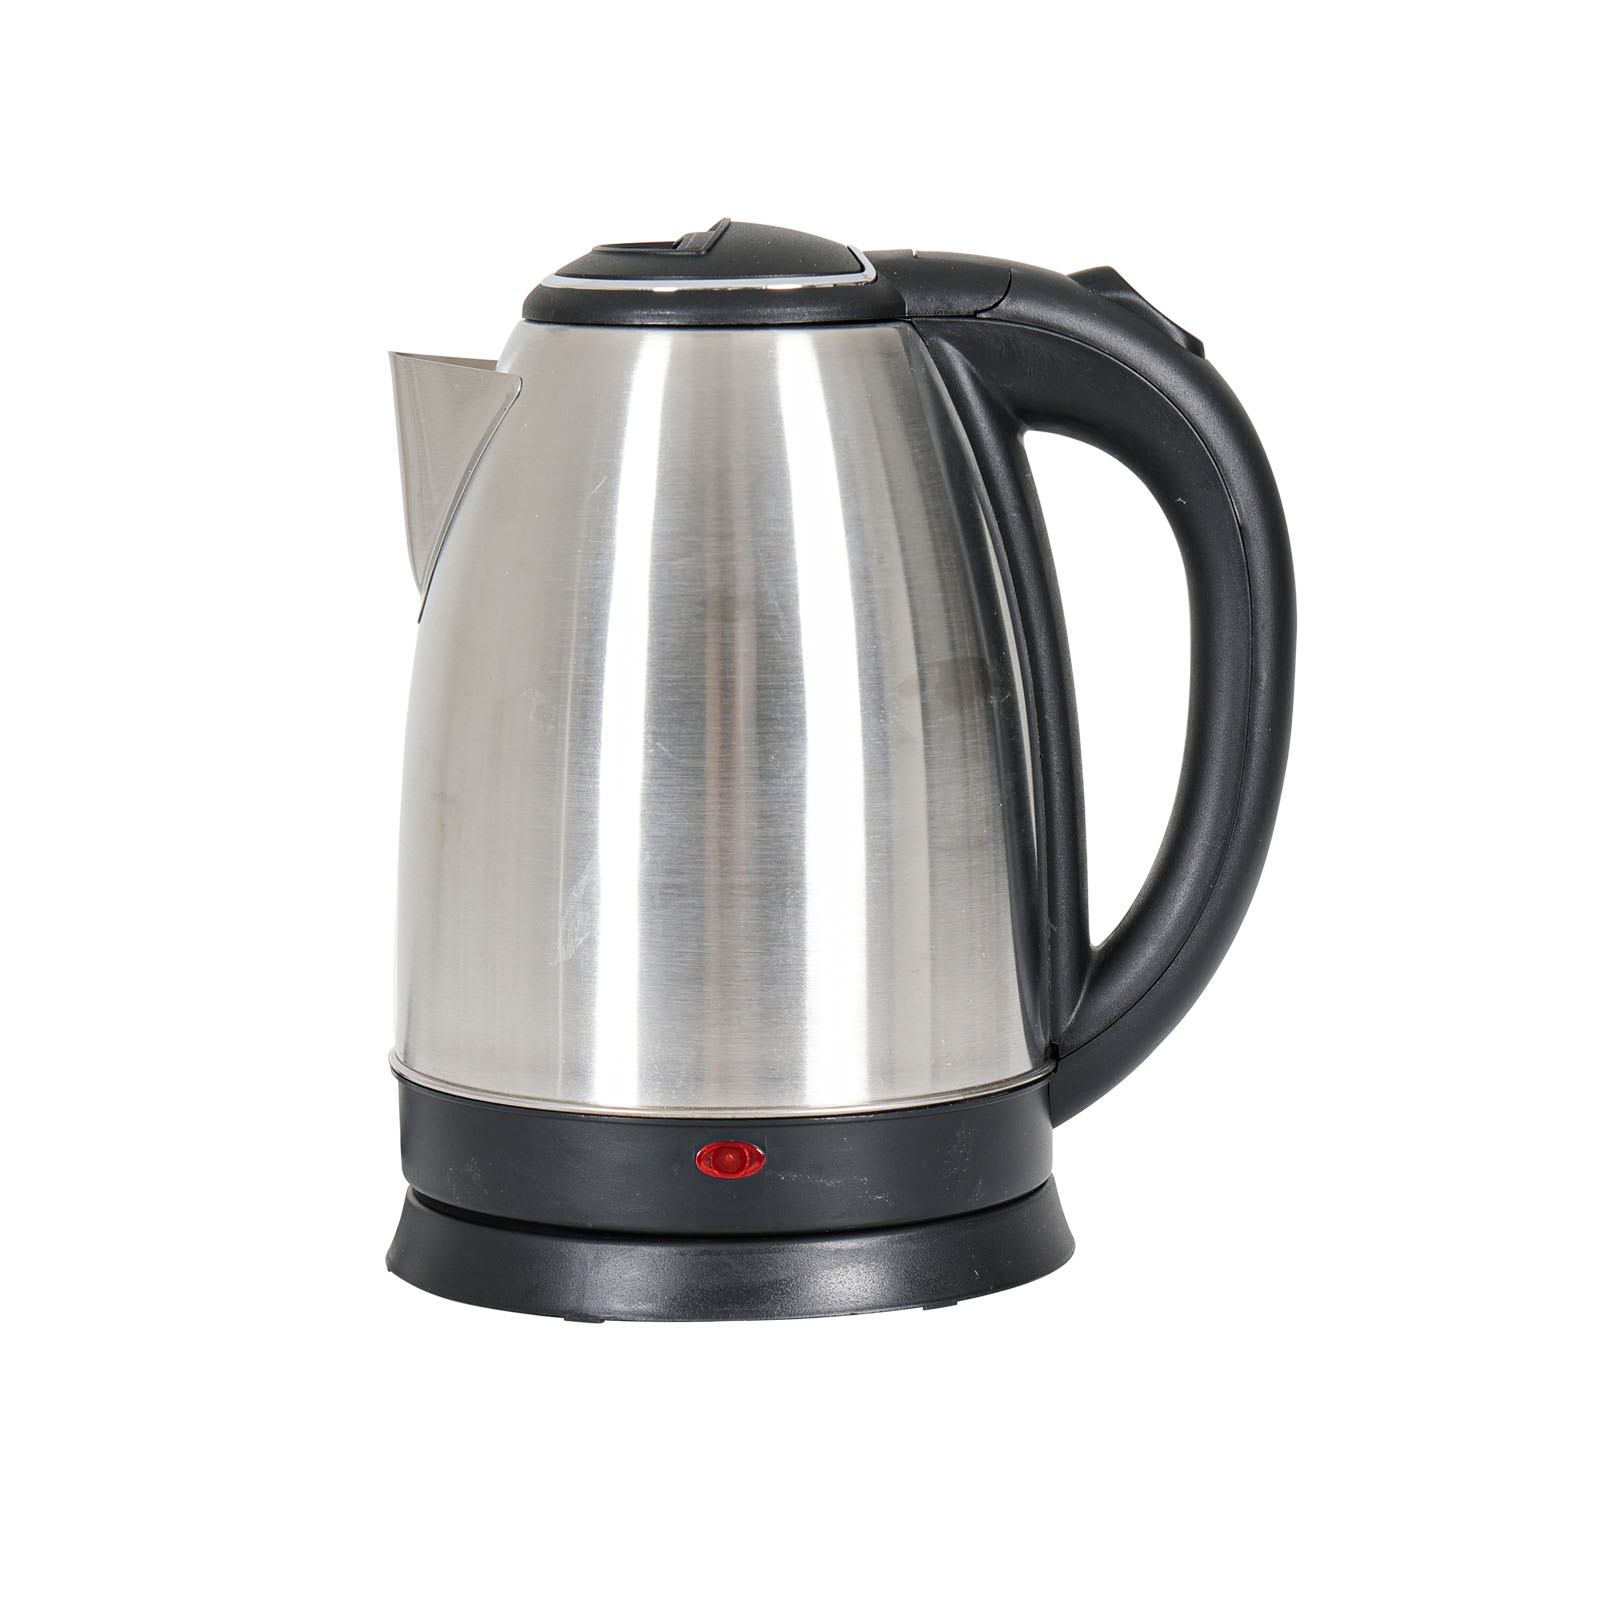 KA-D11 HOWSTODAY Stainless Steel Kettle with Large Capacity